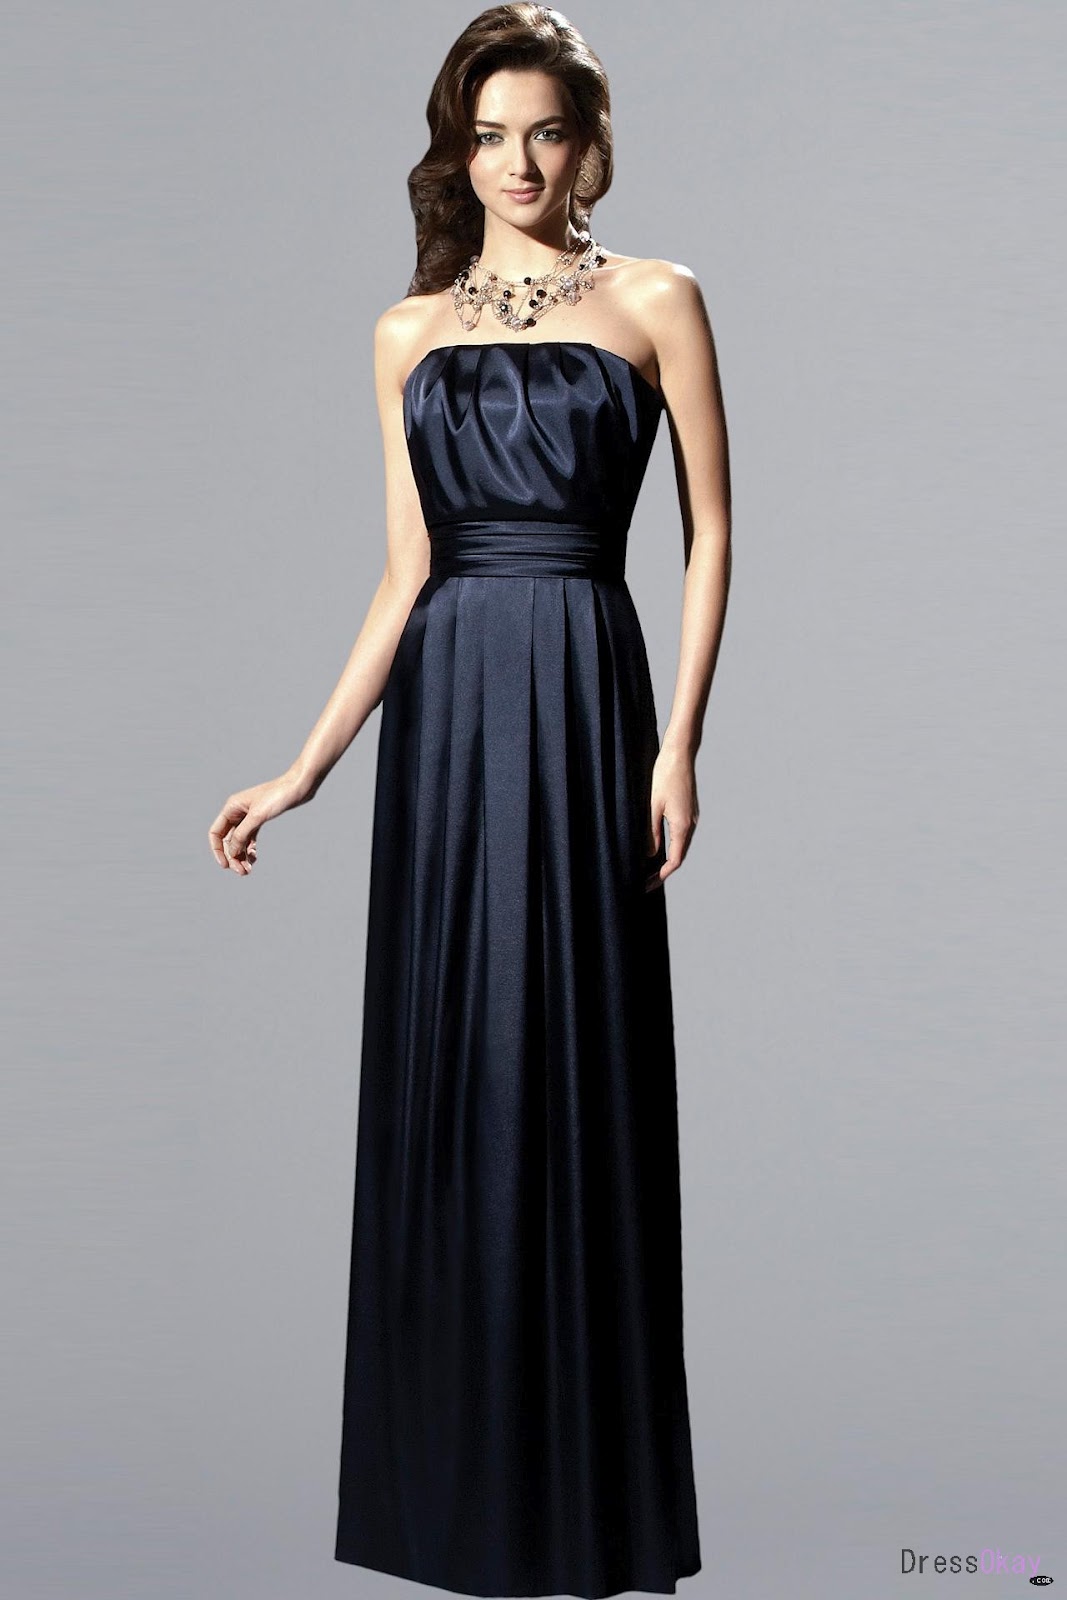 ball gown wedding dresses with sweetheart neckline and straps Midnight Blue Bridesmaid Dresses